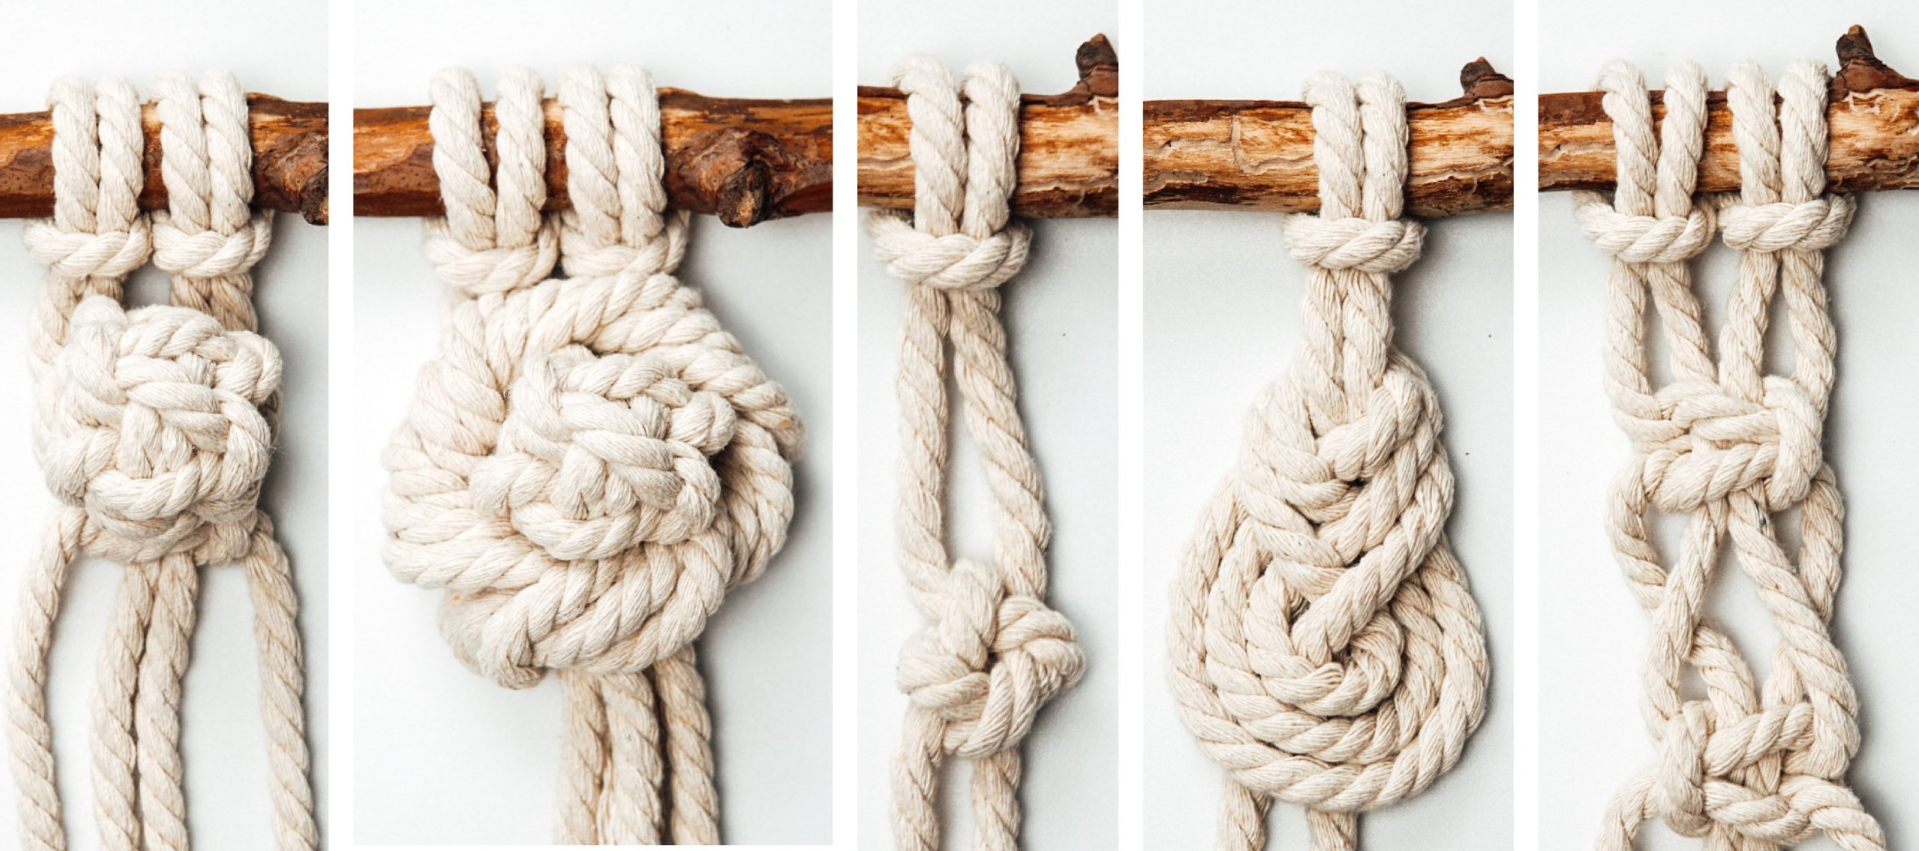 Sample of various types of macrame hanging knots.